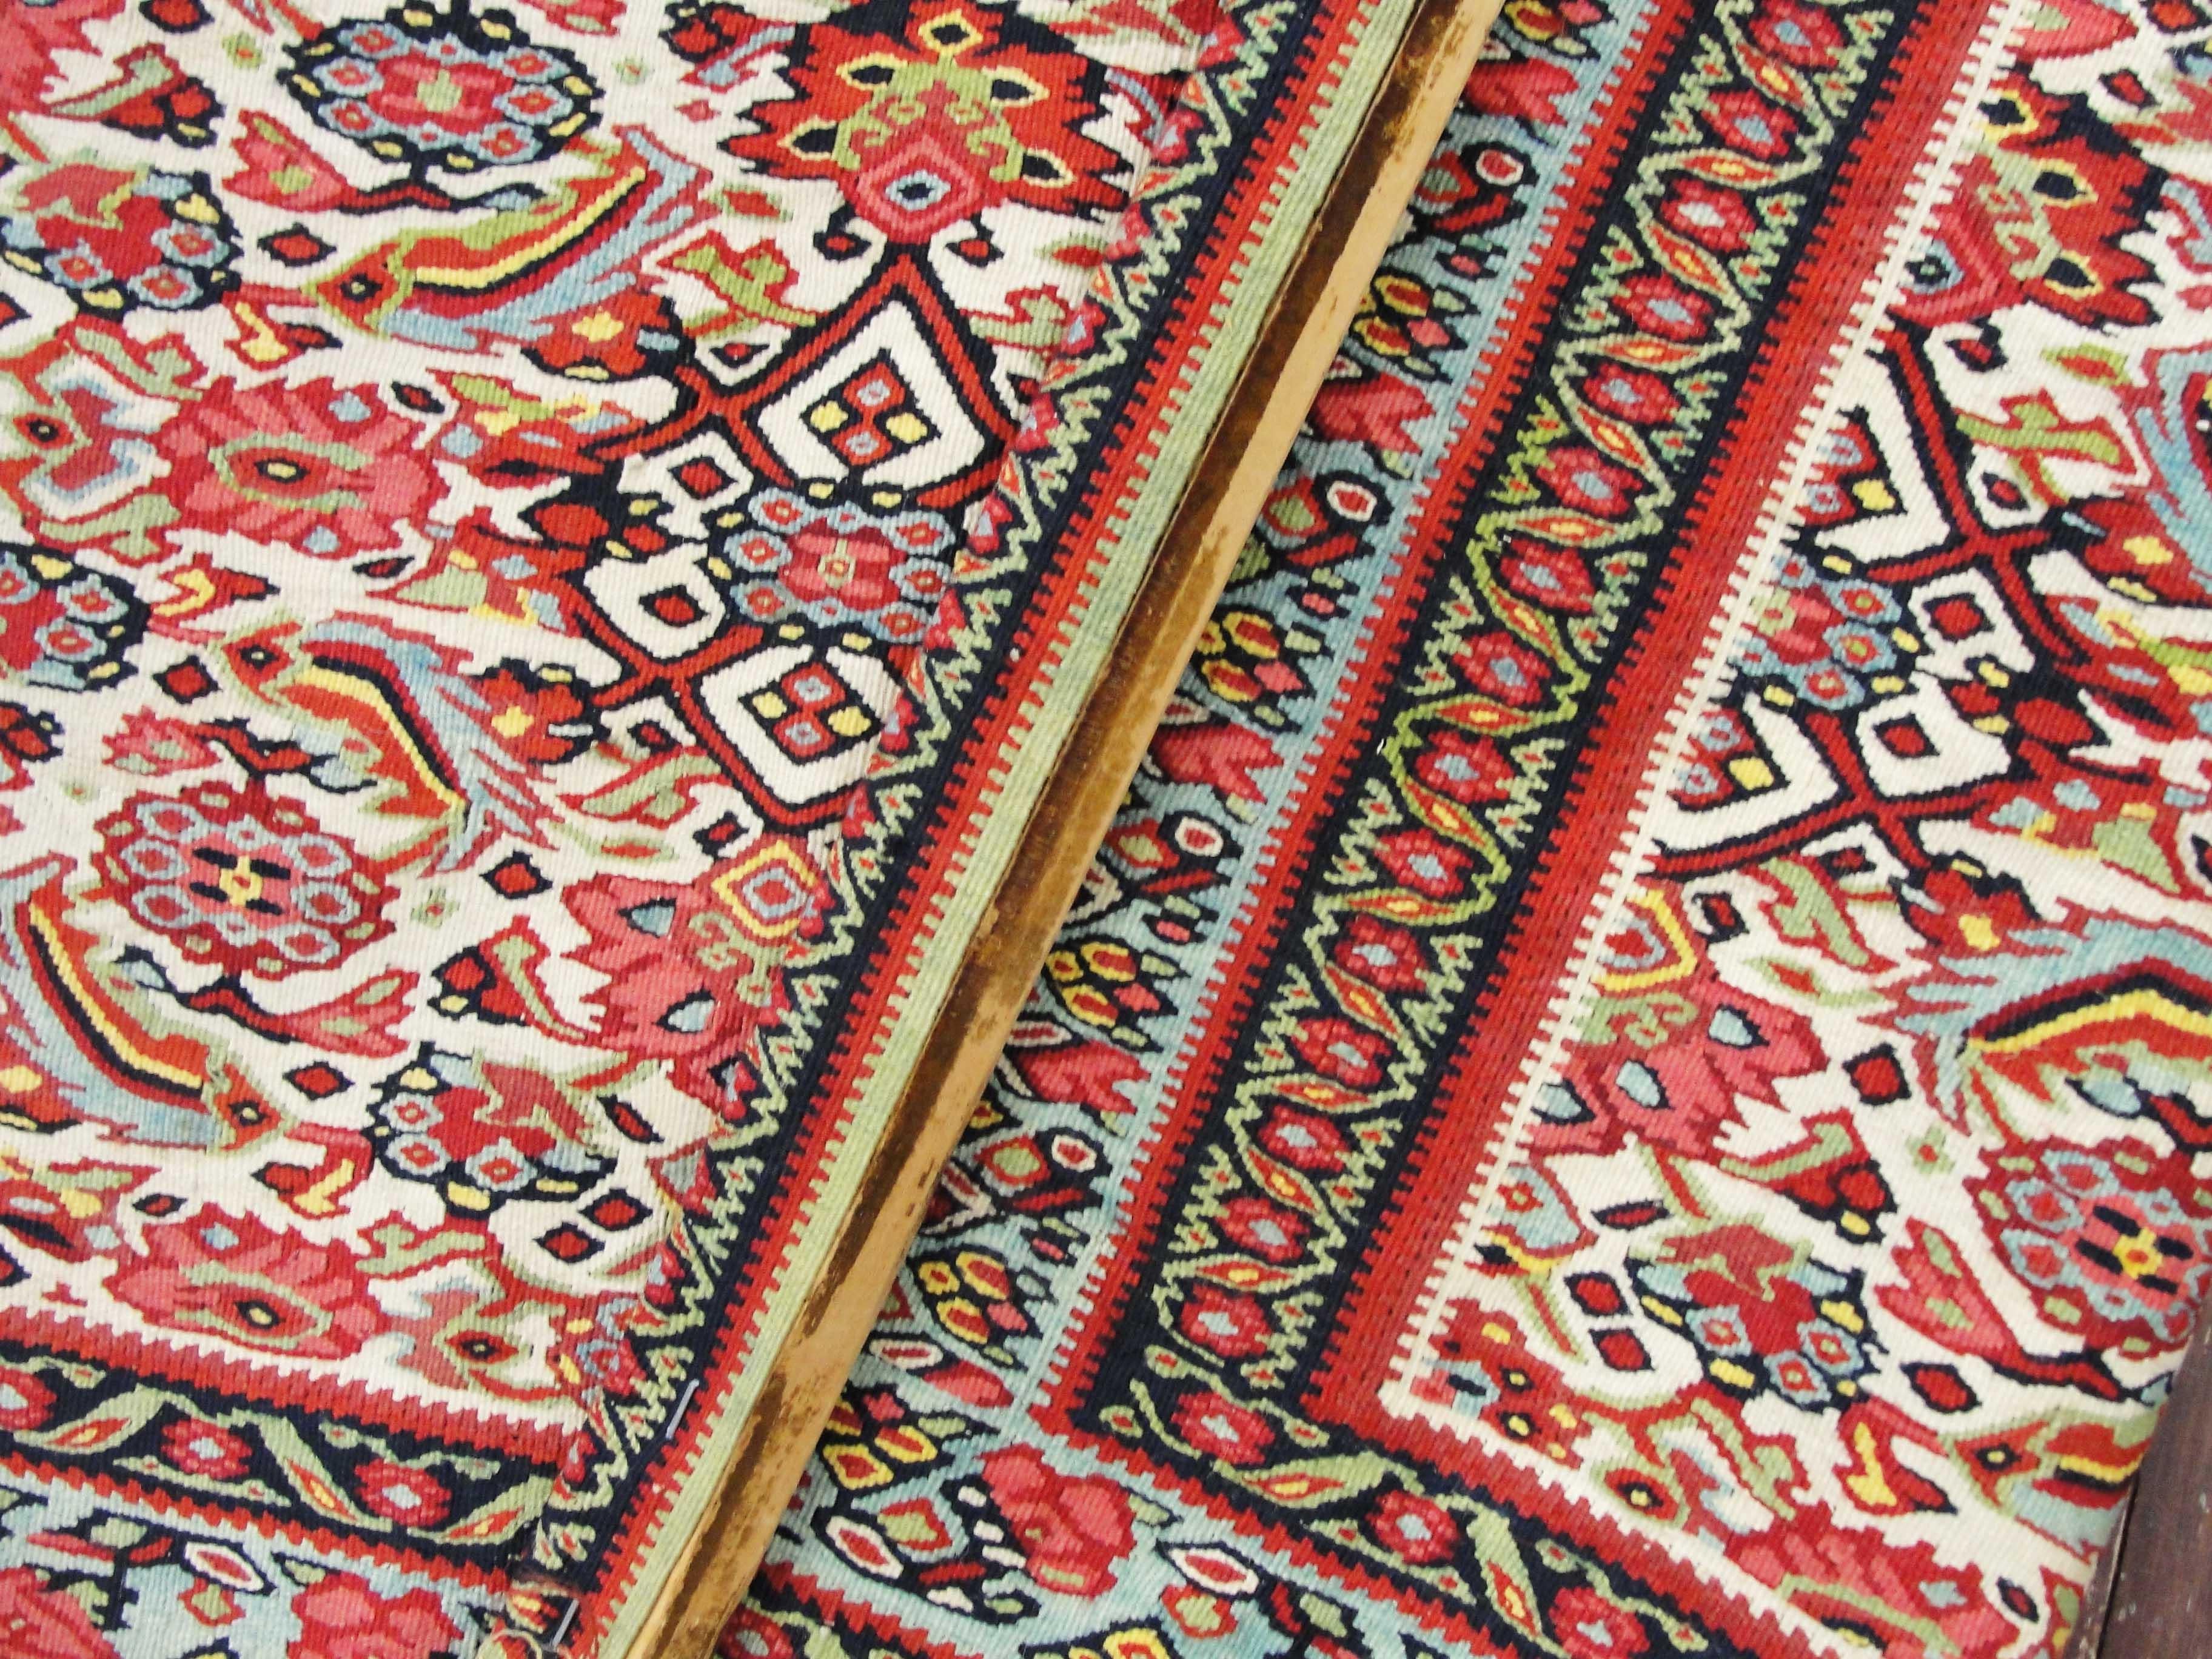 The province of Kurdistan is situated in the western part of Iran. Its capital today is Sanandaj, but in the context of carpets, the older name, Senneh, is still used. Around the province the Kurdish people weave strong, durable carpets with juicy